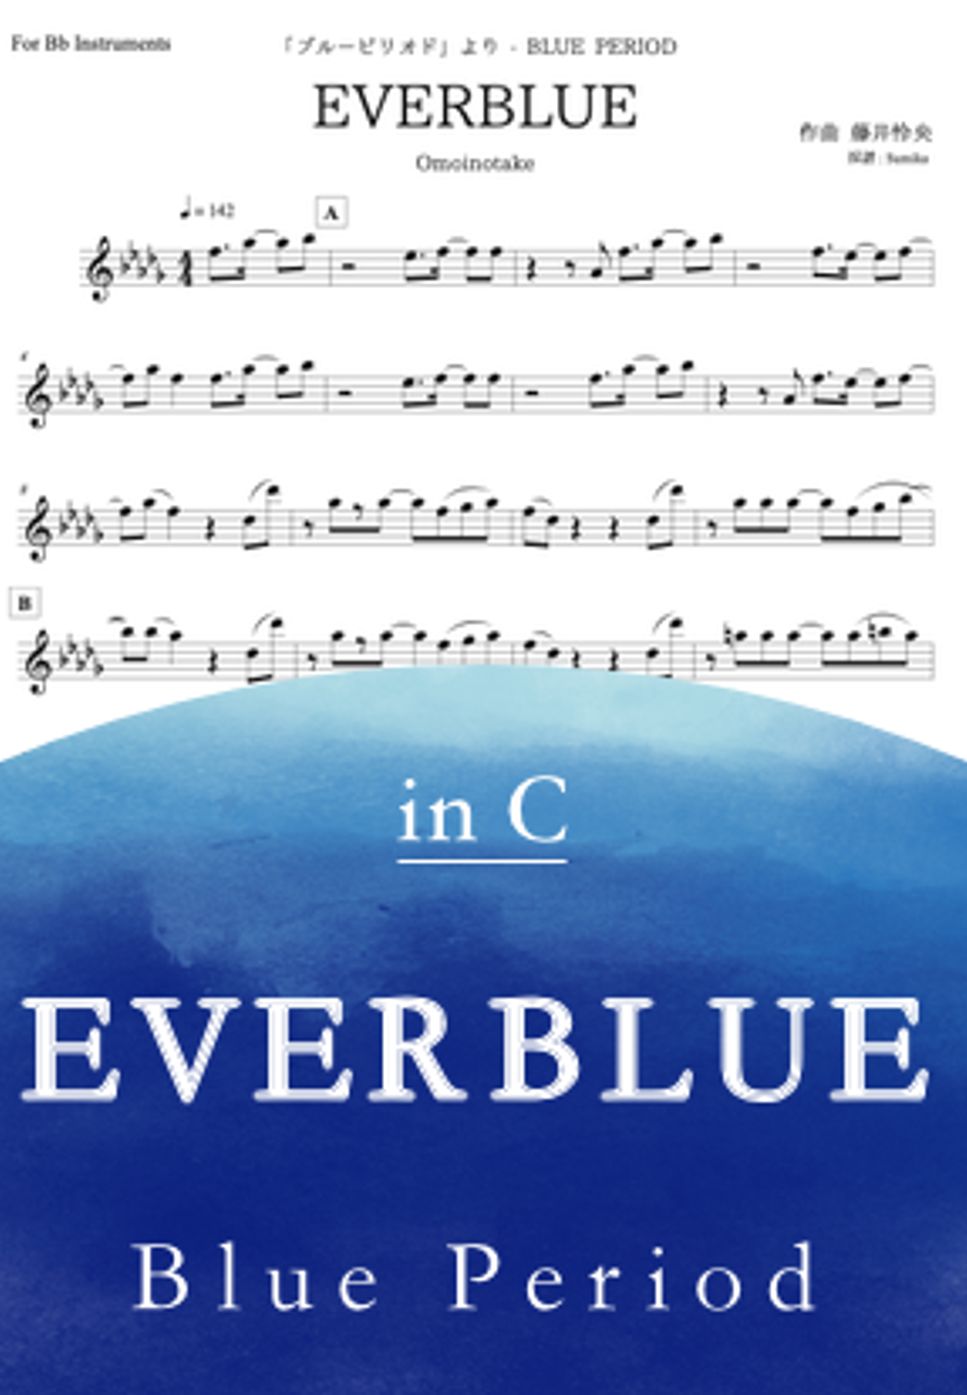 Blue Period - EVERBLUE (in C) by Sumika